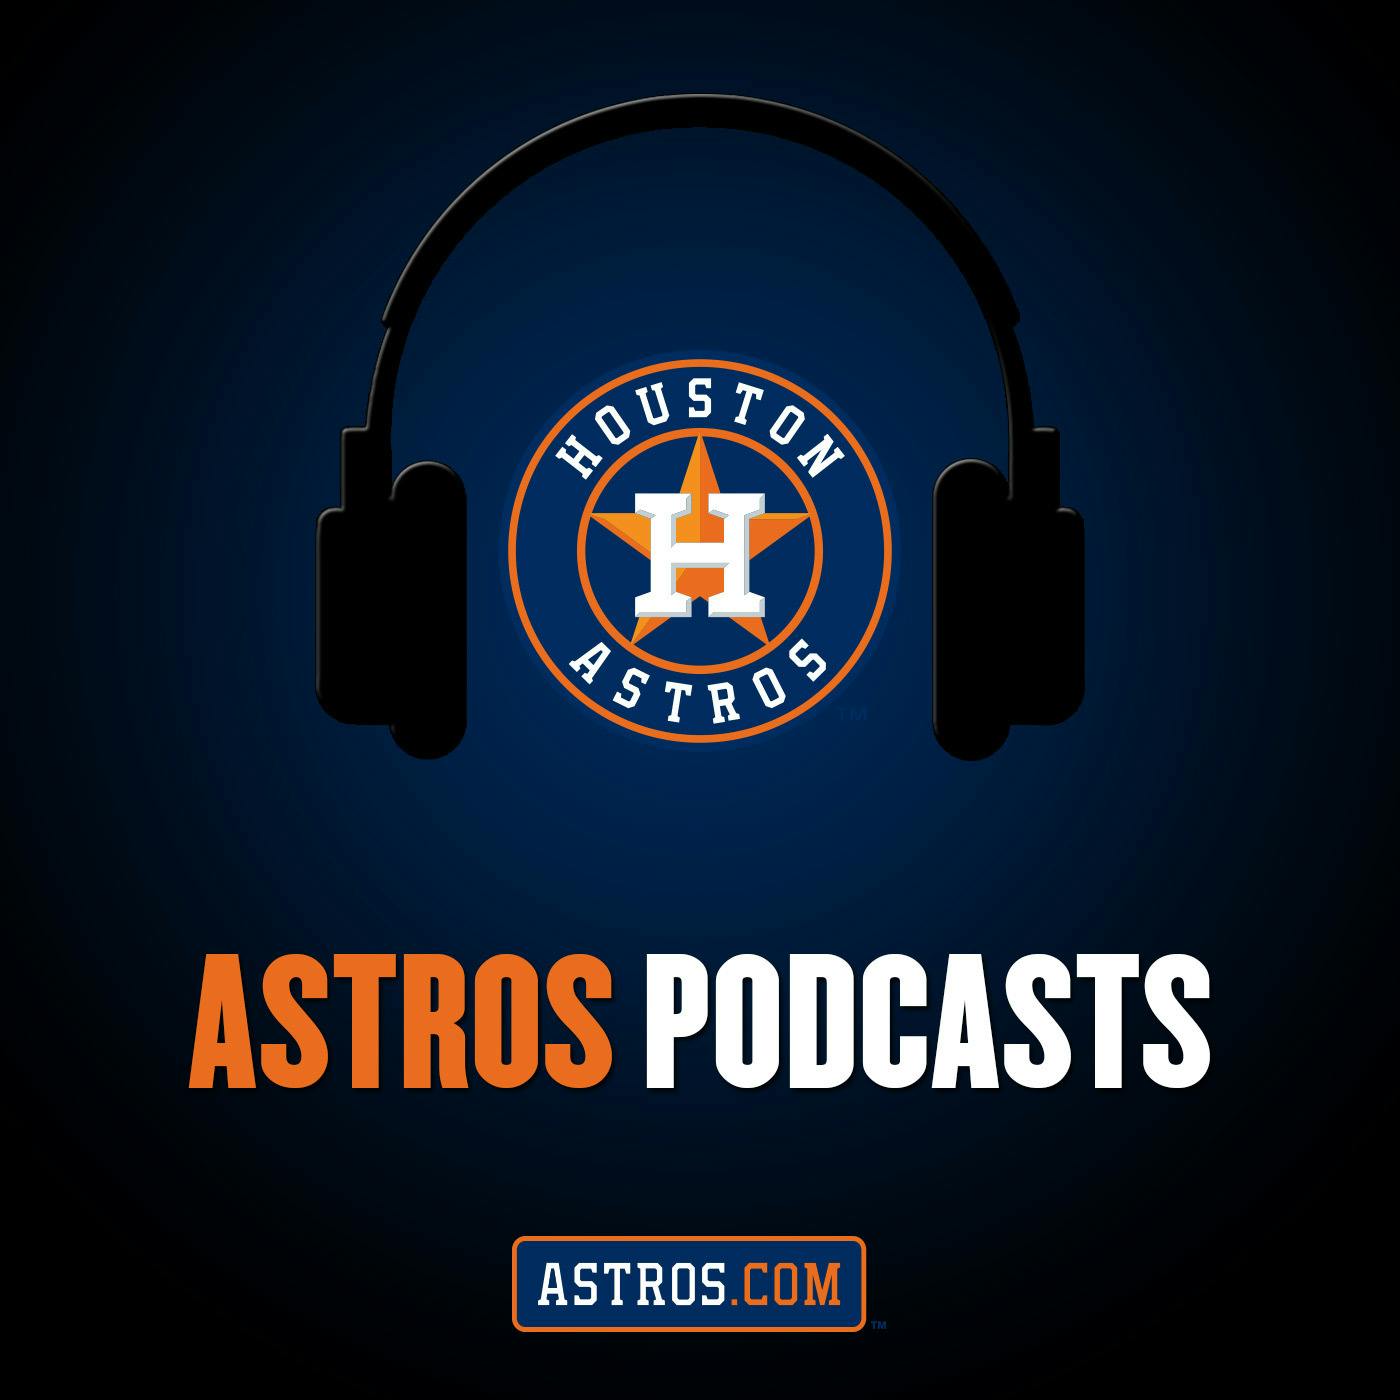 8/17 ASTROCAST presented by KARBACH featuring Dusty Baker, Jack Mayfield, Abraham Toro, Josh James